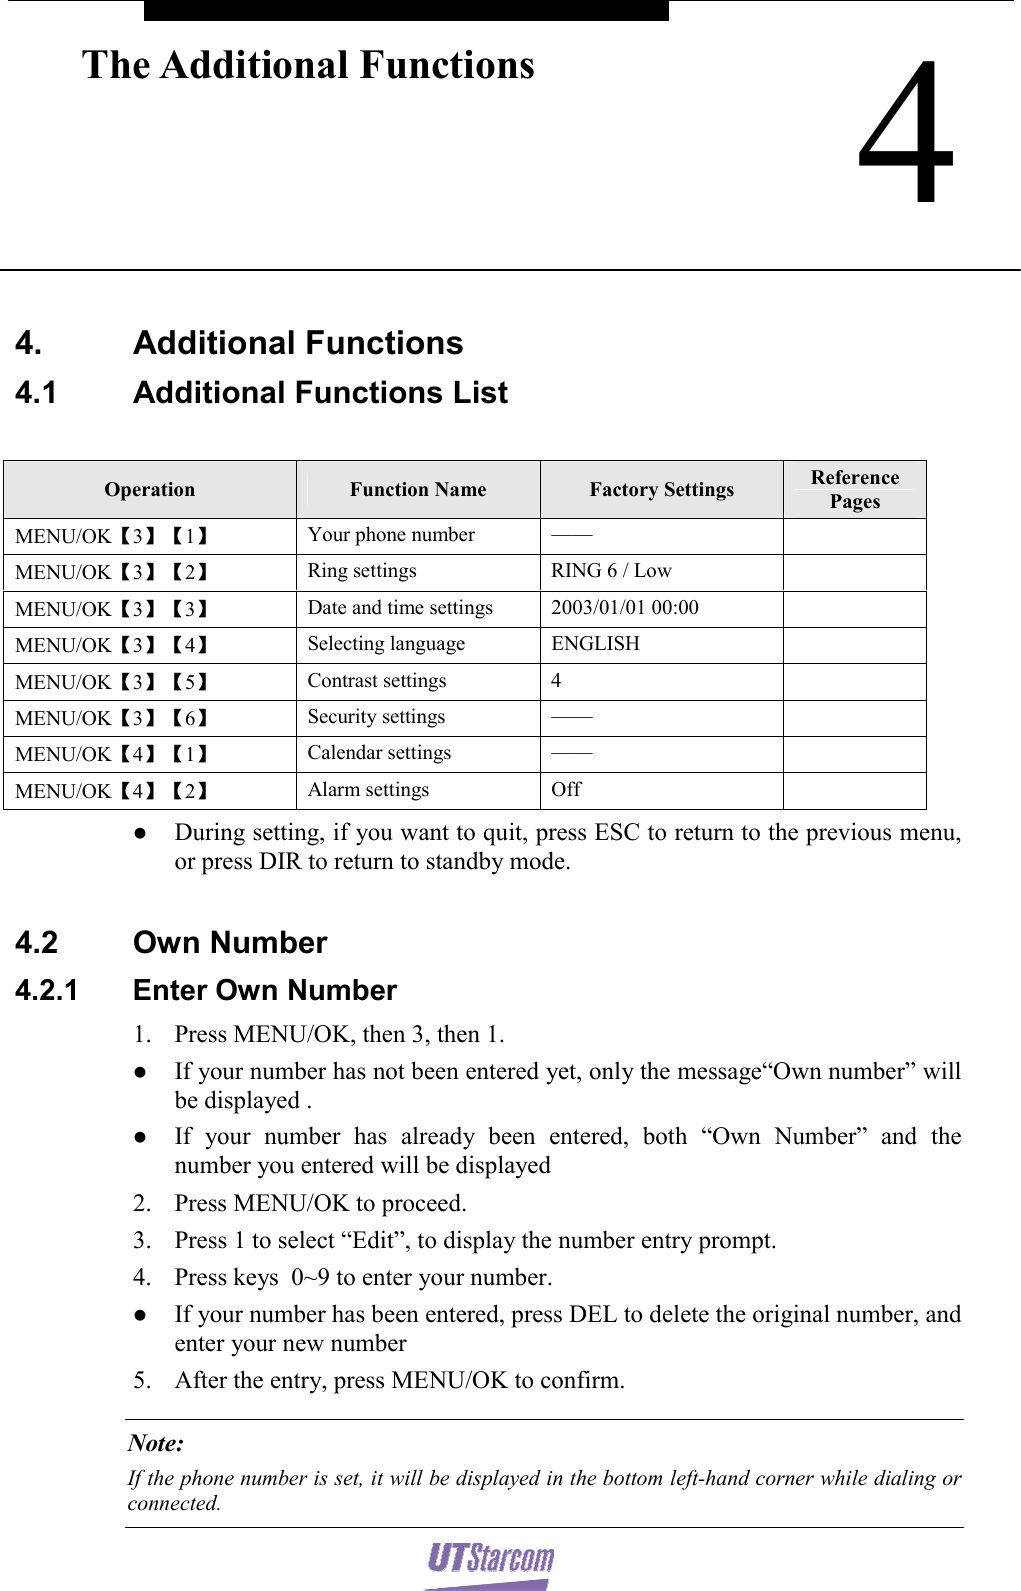    4The Additional Functions  4.  Additional Functions  4.1  Additional Functions List  Operation  Function Name  Factory Settings  Reference Pages MENU/OK【3】【1】 Your phone number  ——  MENU/OK【3】【2】 Ring settings  RING 6 / Low    MENU/OK【3】【3】 Date and time settings  2003/01/01 00:00   MENU/OK【3】【4】 Selecting language  ENGLISH   MENU/OK【3】【5】 Contrast settings  4   MENU/OK【3】【6】 Security settings  ——  MENU/OK【4】【1】 Calendar settings  ——  MENU/OK【4】【2】 Alarm settings  Off   z During setting, if you want to quit, press ESC to return to the previous menu, or press DIR to return to standby mode.  4.2 Own Number 4.2.1 Enter Own Number 1. Press MENU/OK, then 3, then 1. z If your number has not been entered yet, only the message“Own number” will be displayed . z If your number has already been entered, both “Own Number” and the number you entered will be displayed 2. Press MENU/OK to proceed. 3. Press 1 to select “Edit”, to display the number entry prompt. 4. Press keys  0~9 to enter your number. z If your number has been entered, press DEL to delete the original number, and enter your new number 5. After the entry, press MENU/OK to confirm. Note: If the phone number is set, it will be displayed in the bottom left-hand corner while dialing or connected. 